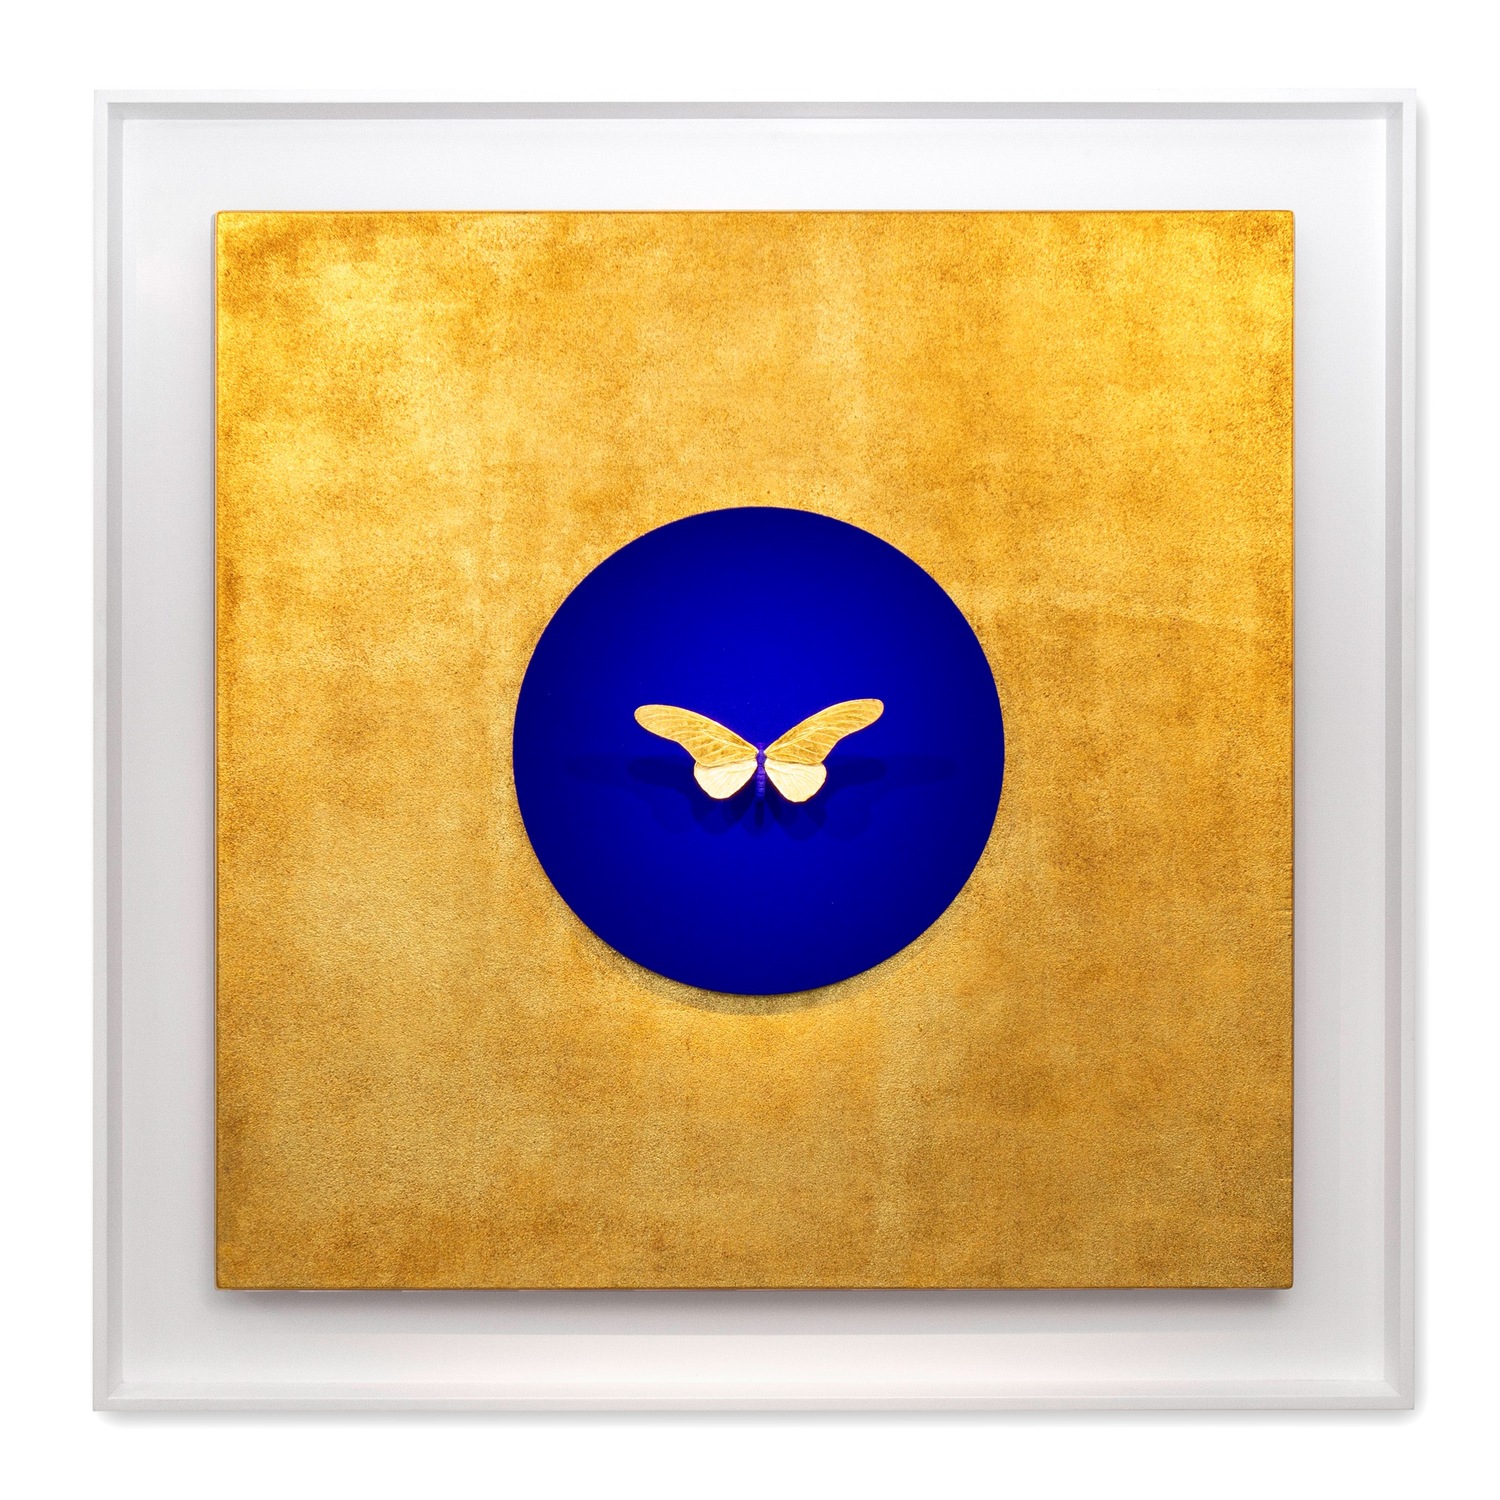 Inversion Blue on Gold II